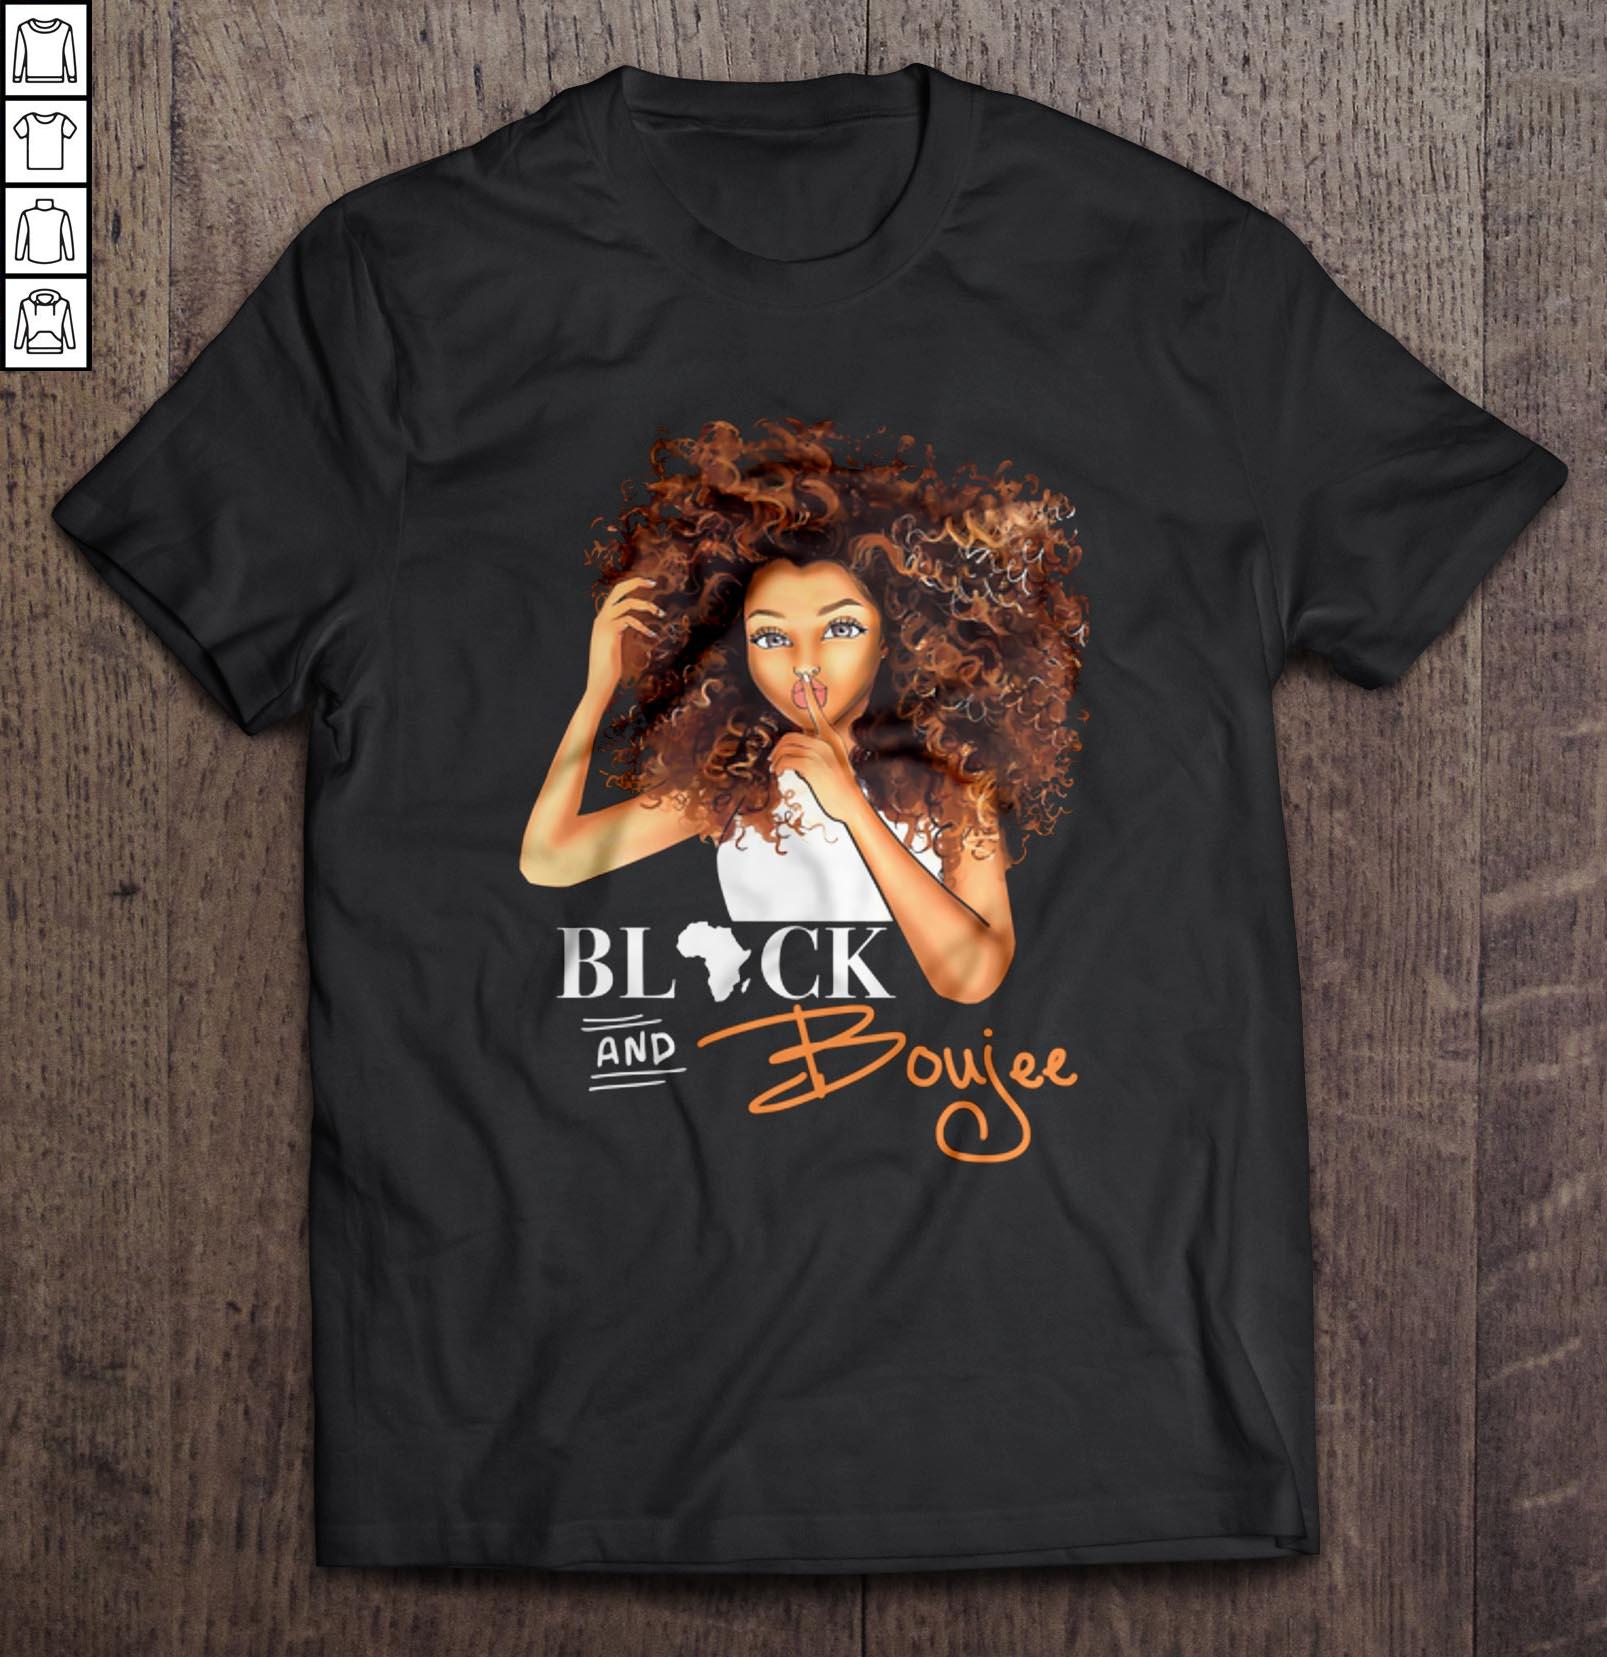 Black and boujee V-Neck T-Shirt